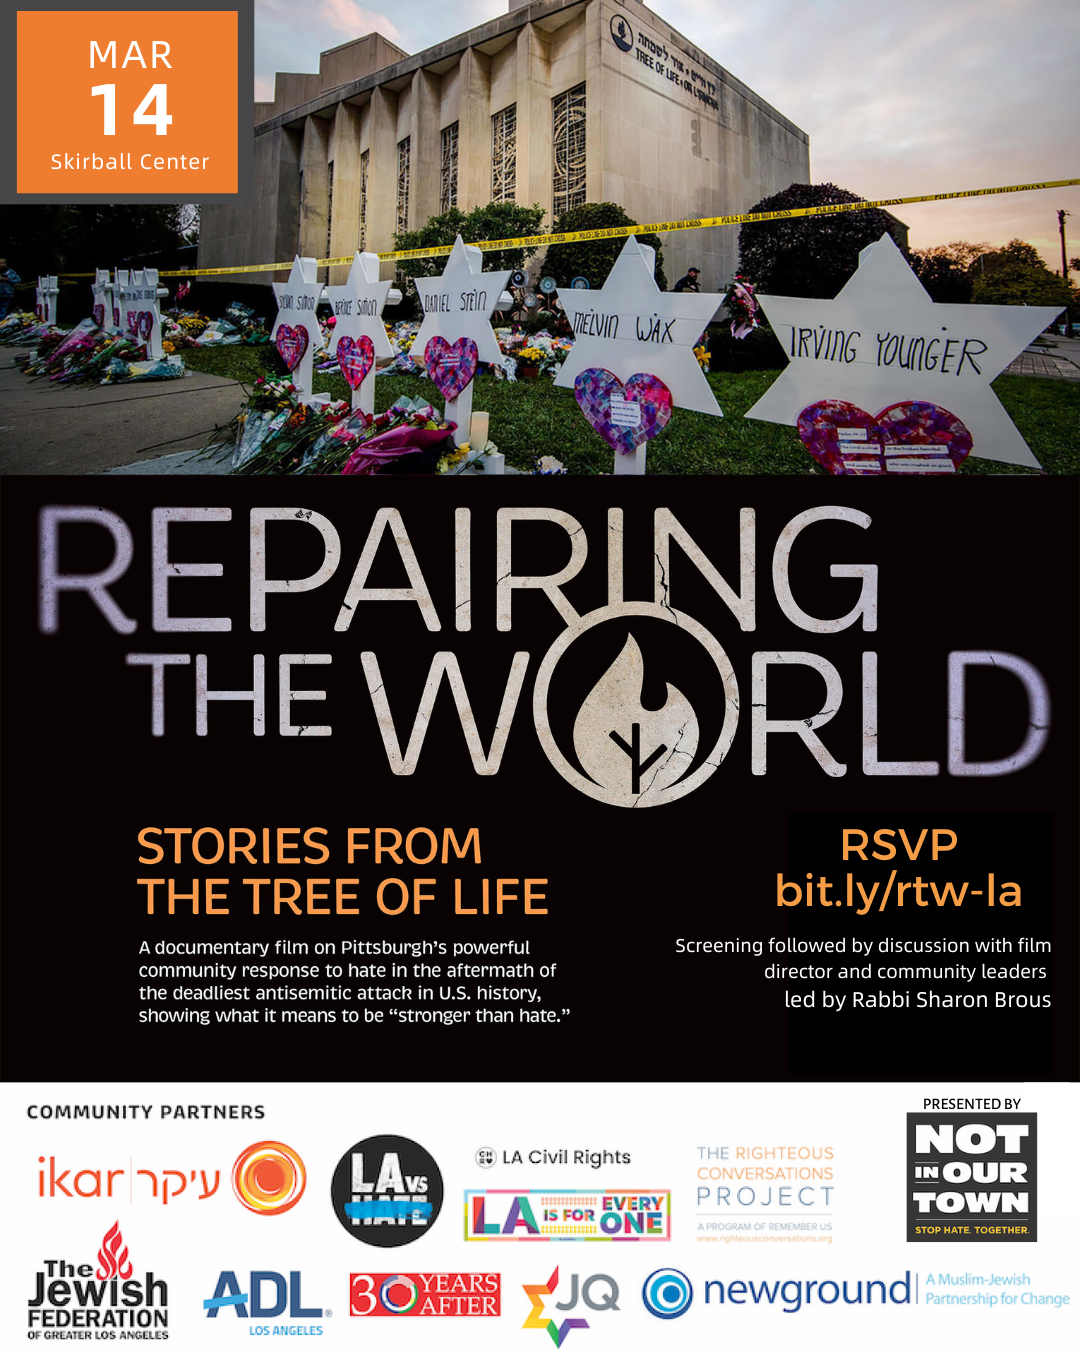 Repairing the World Screening in Los Angeles on Mar. 14 at the Skirball Cultural Center